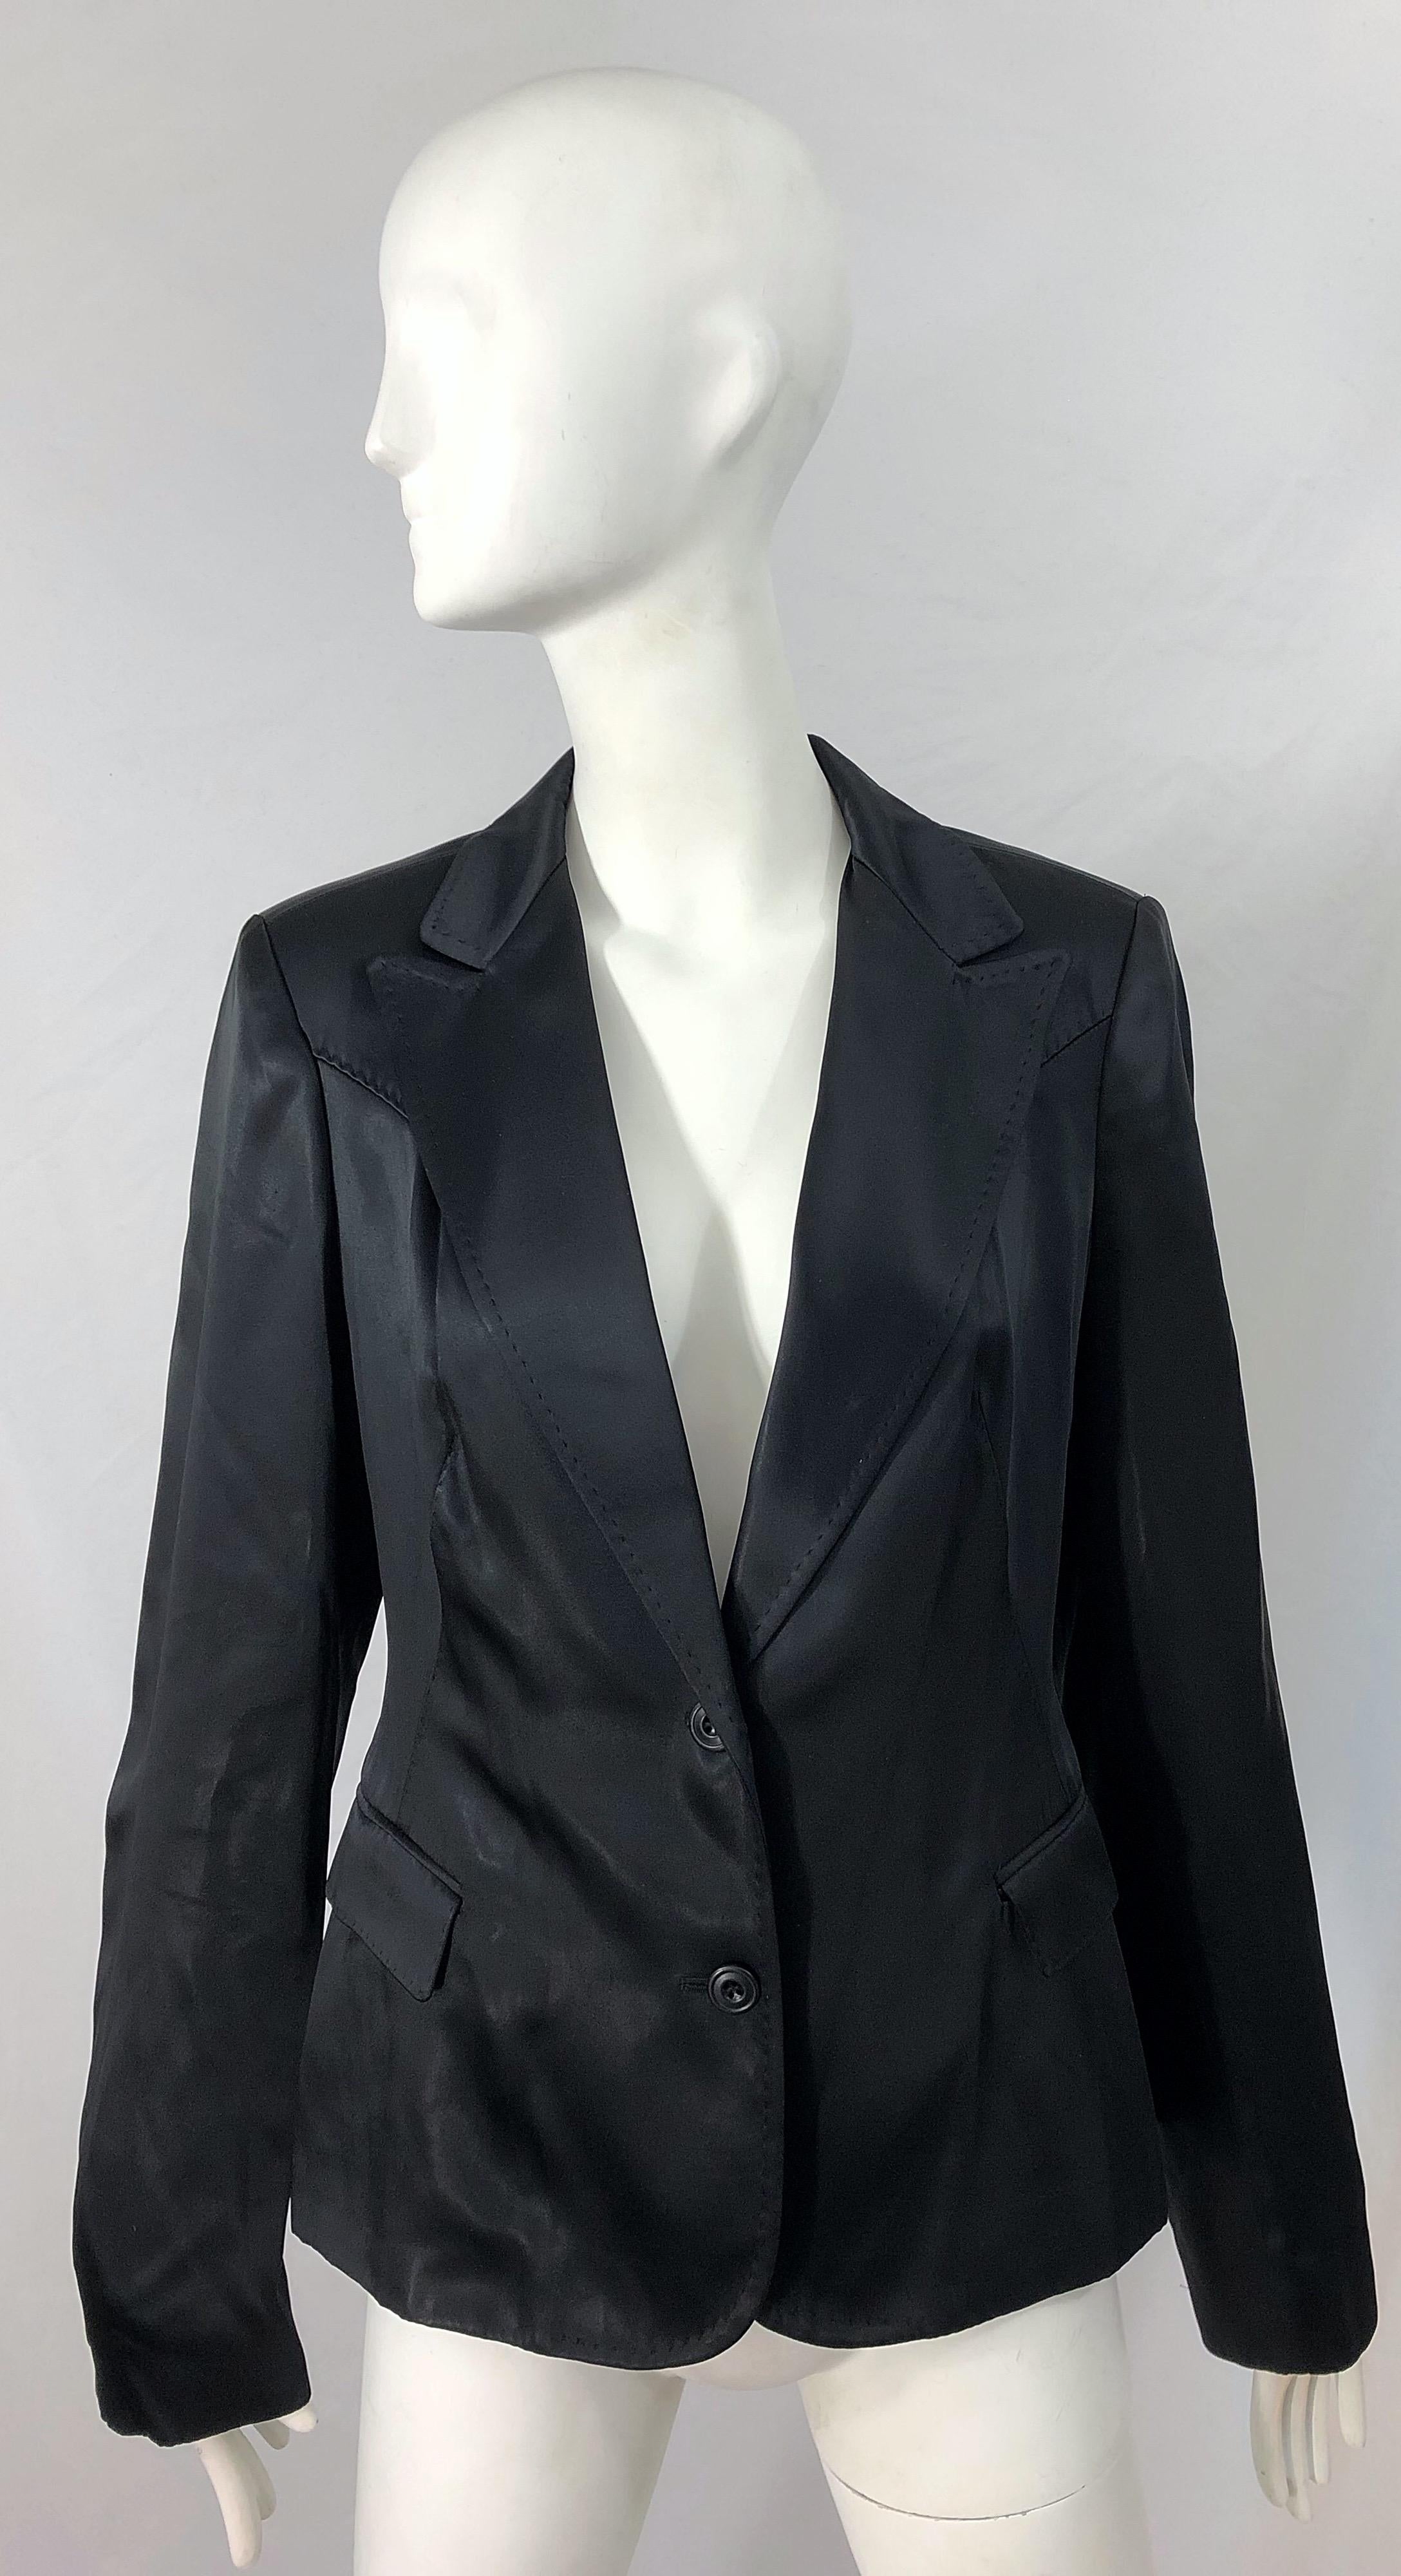 Chic late 90s ALESSANDRO DELL'ACQUA black silk satin look blazer jacket ! Smart tailored fit, with two buttons up the front. Pockets at each side of the waist. Fully lined. The perfect black blazer that is a timeless investment to any wardrobe.